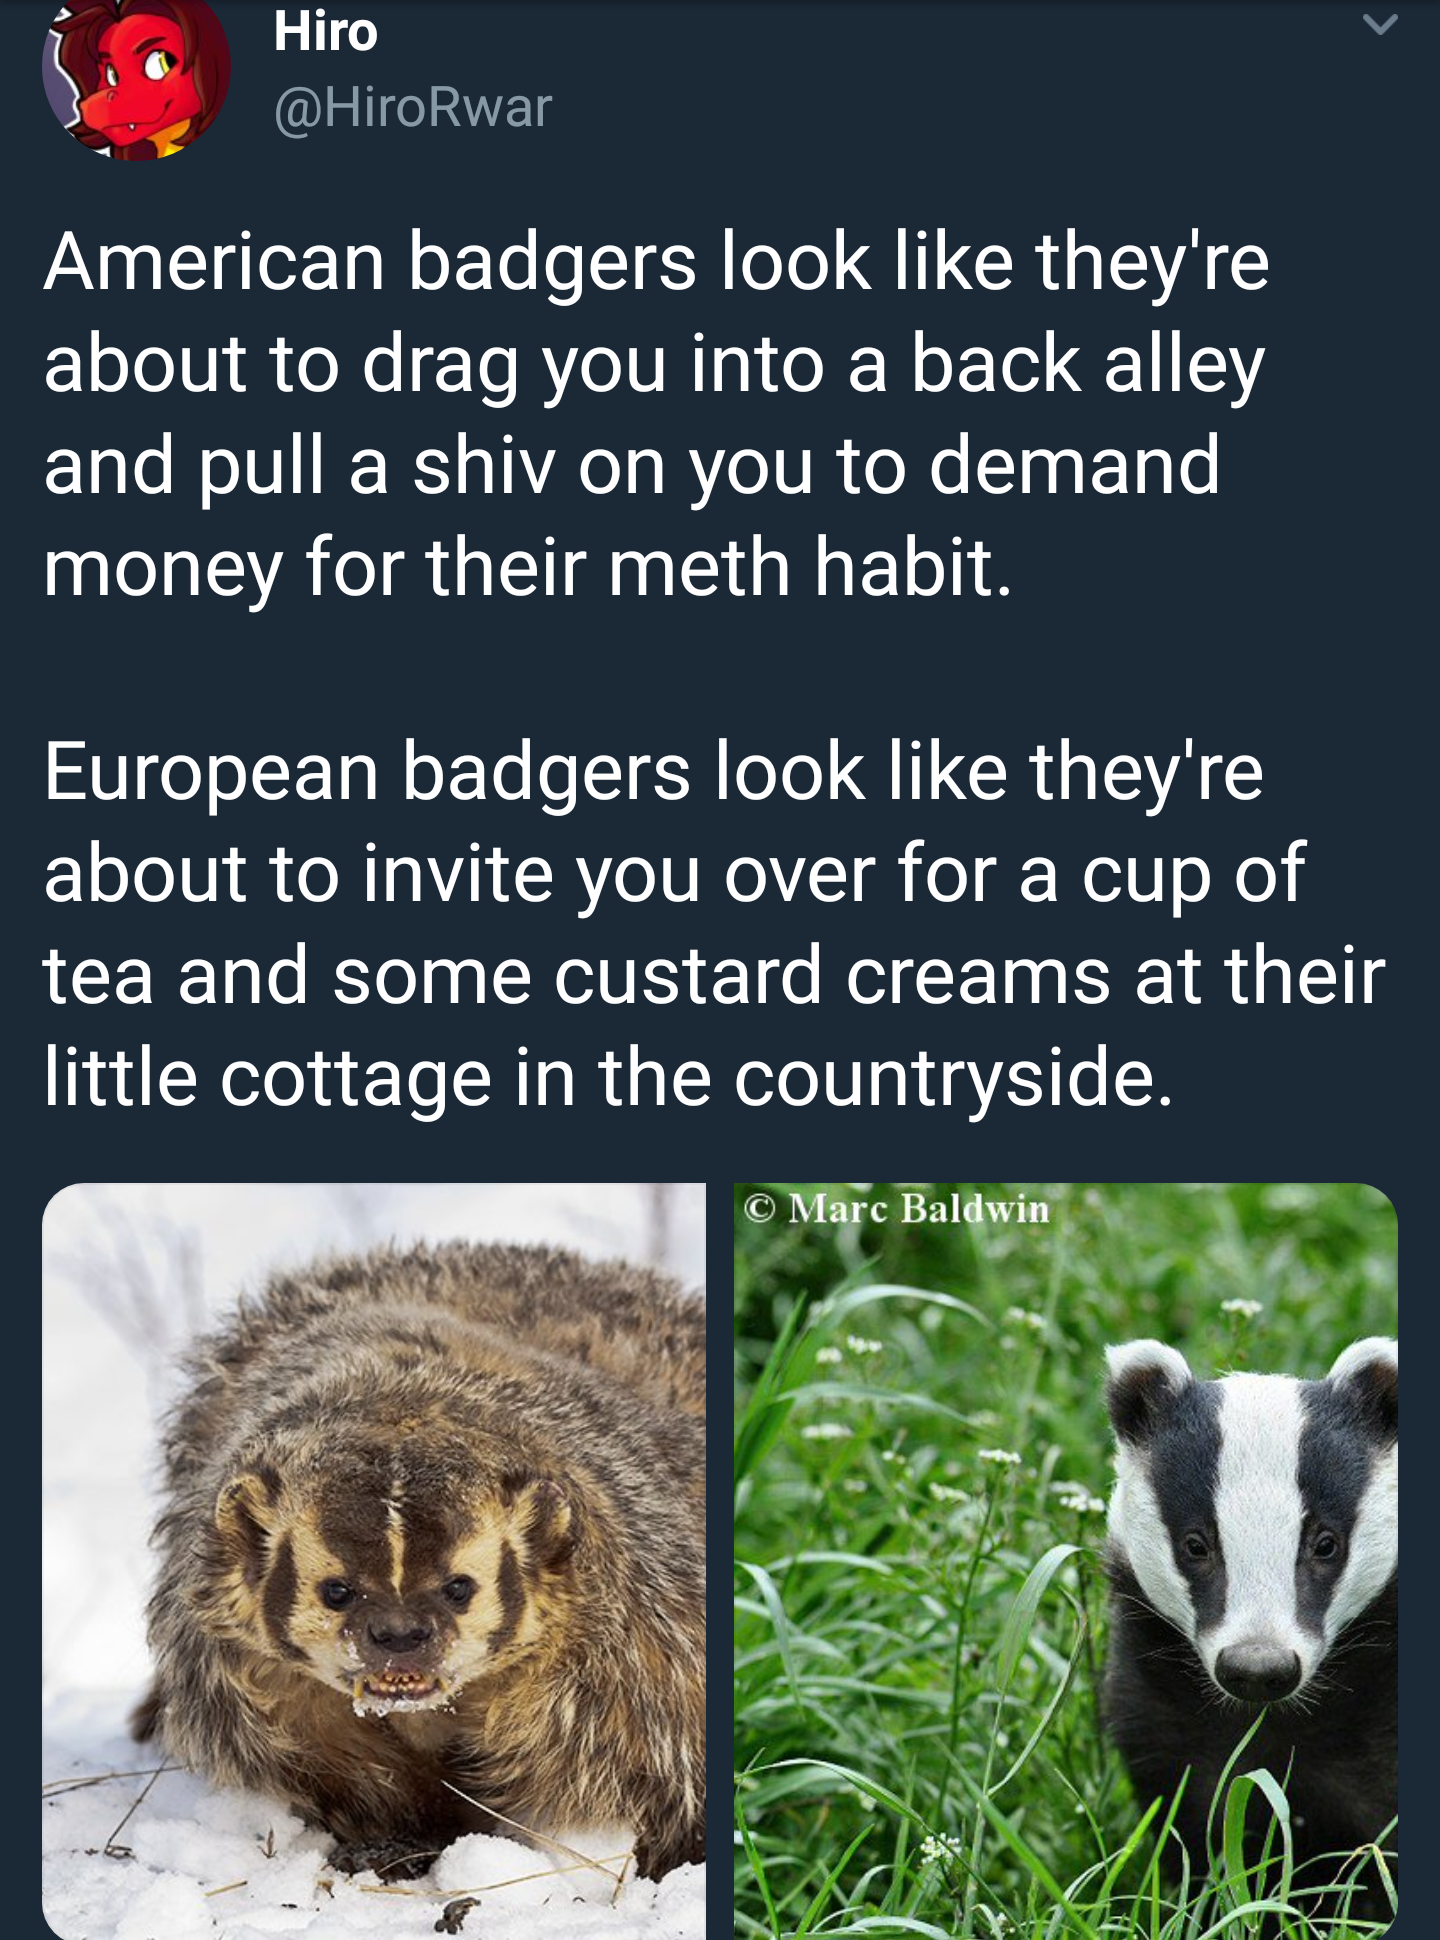 The cultural difference between domestic and foreign badgers.